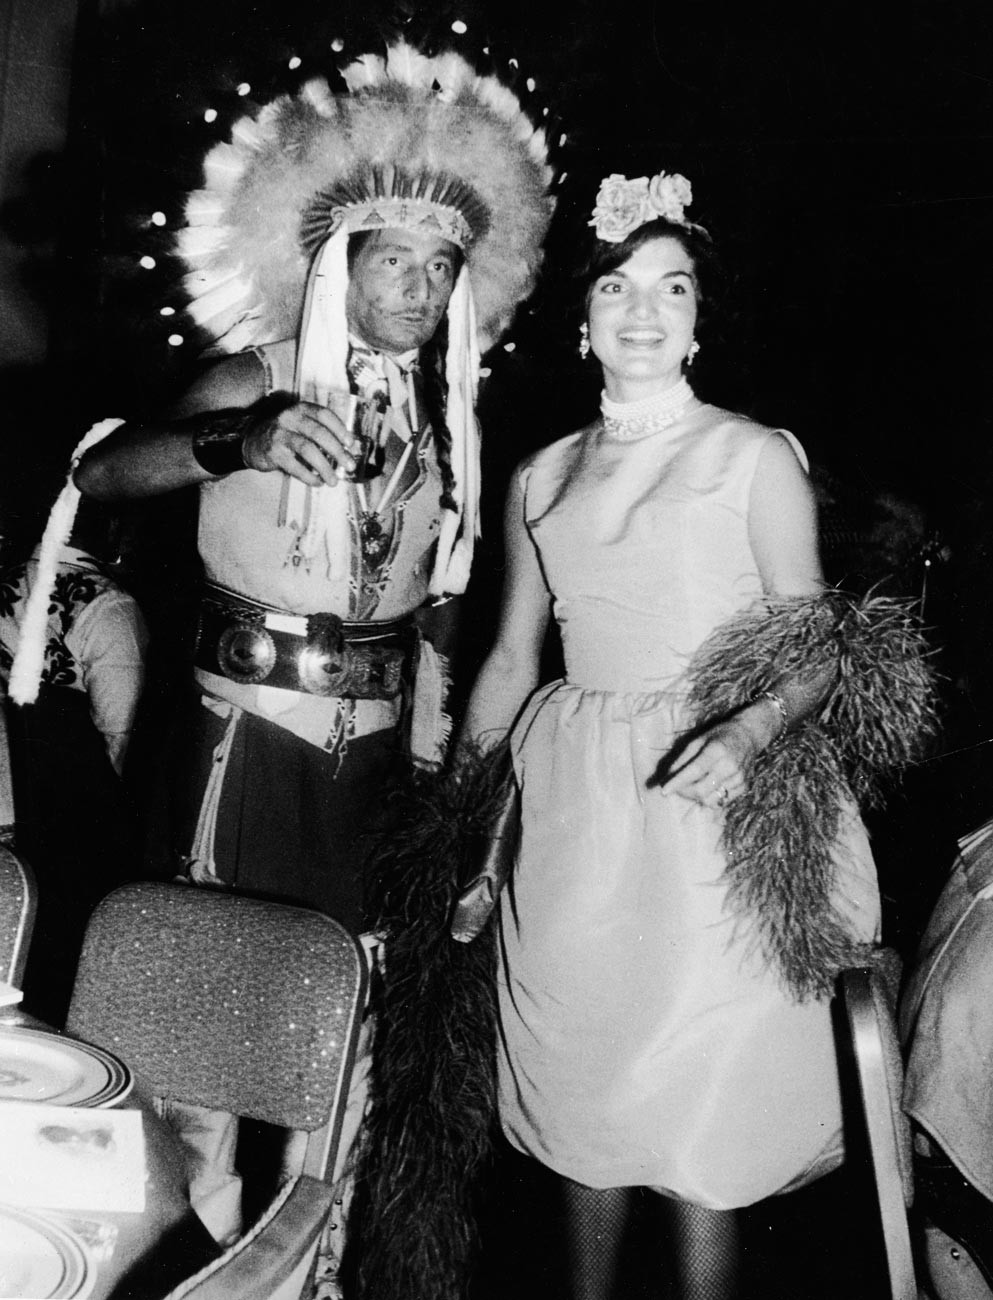 Oleg Cassini and Jacqueline Kennedy attending a costume party in the early 1960s.